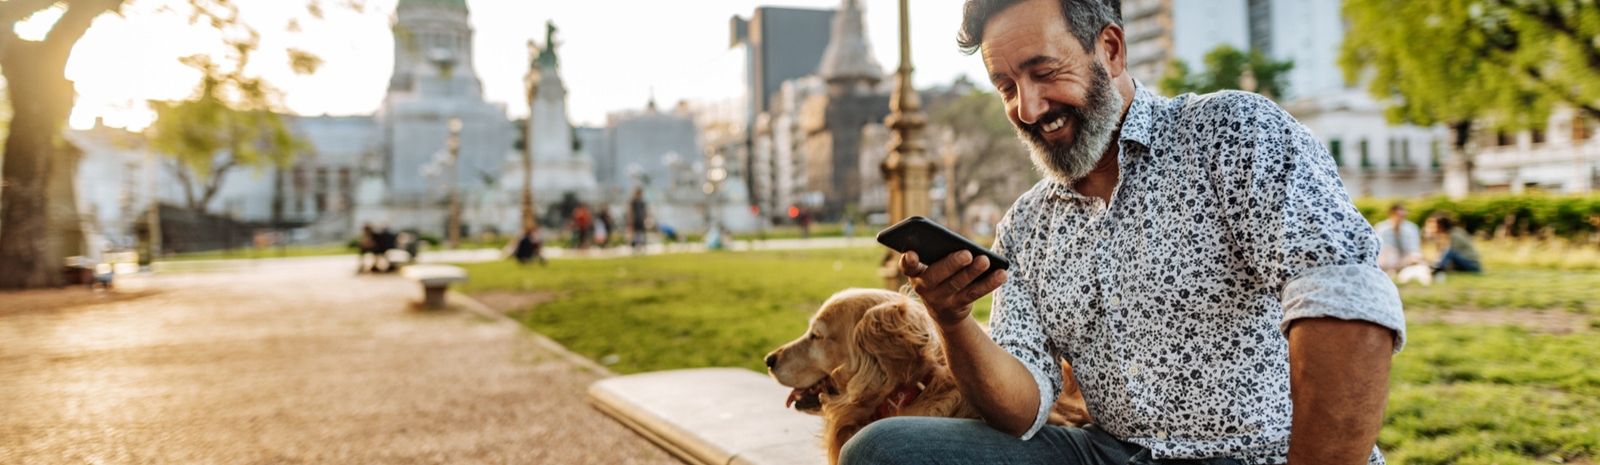 Man sitting outside with dog looking at cell phone